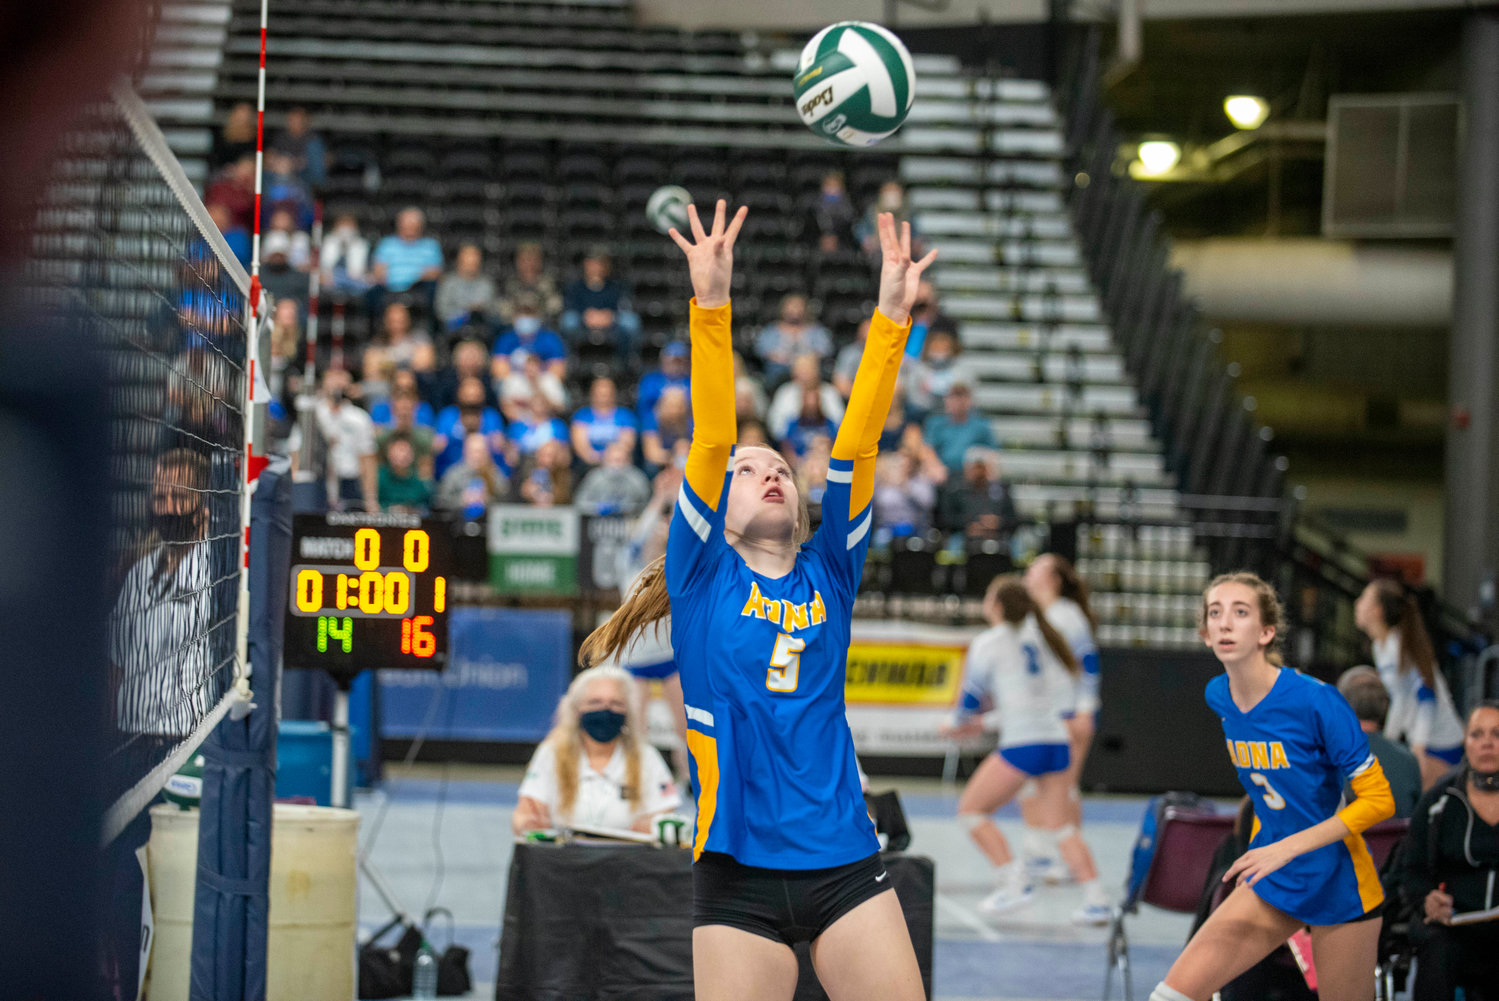 Adna’s Gaby Guard throws up a set against Lind-Ritzville/Sprague at the state tournament Friday in Yakima.